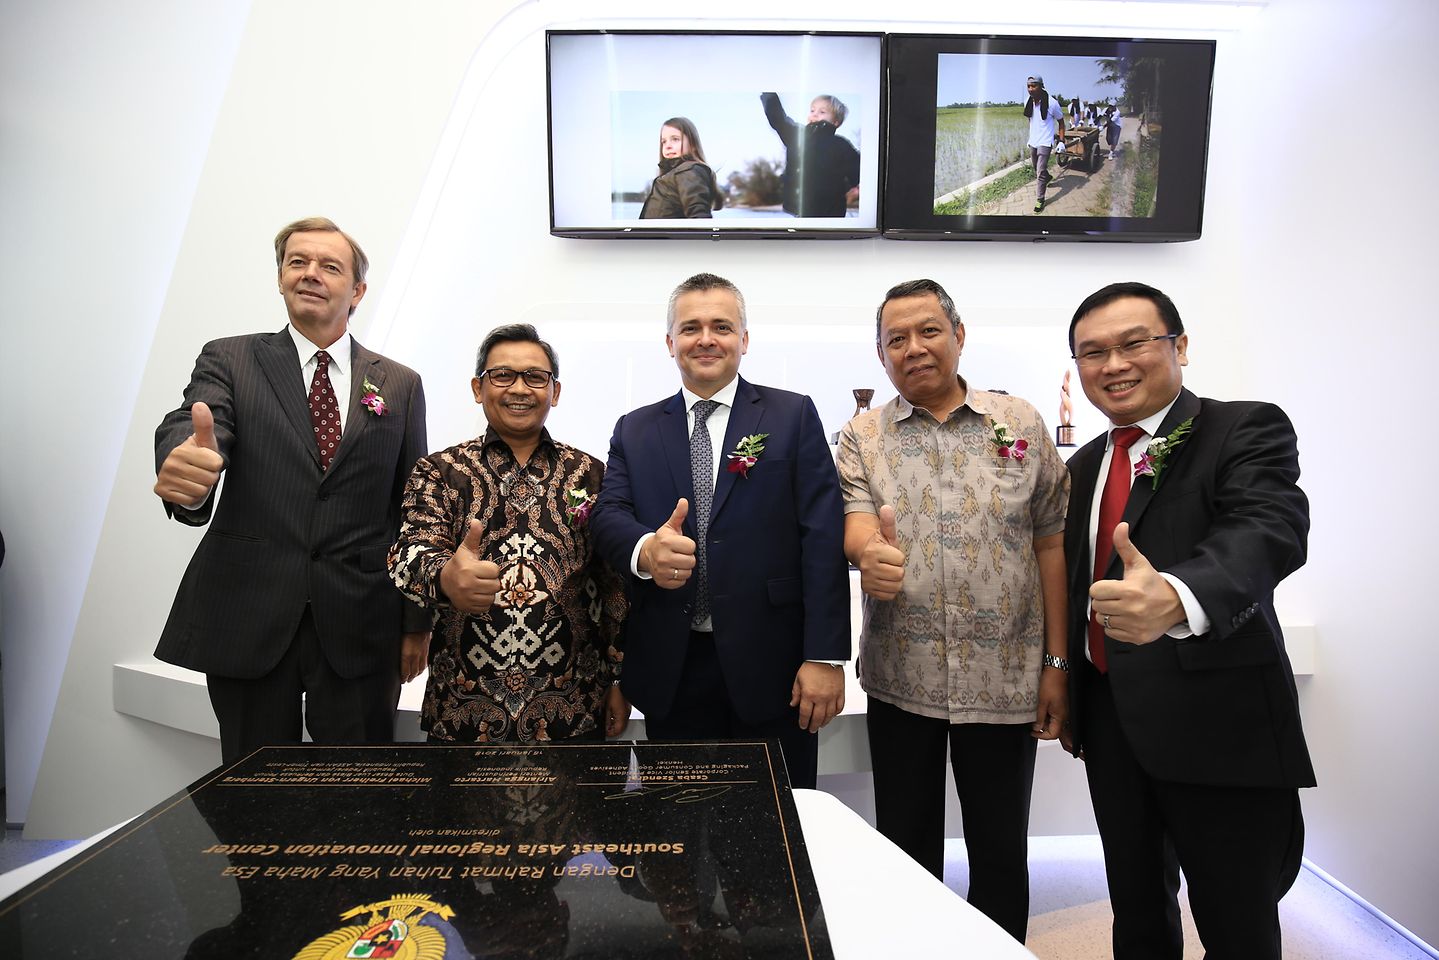 Opening ceremony of Henkel’s Southeast Asia Regional Innovation Center in Indonesia